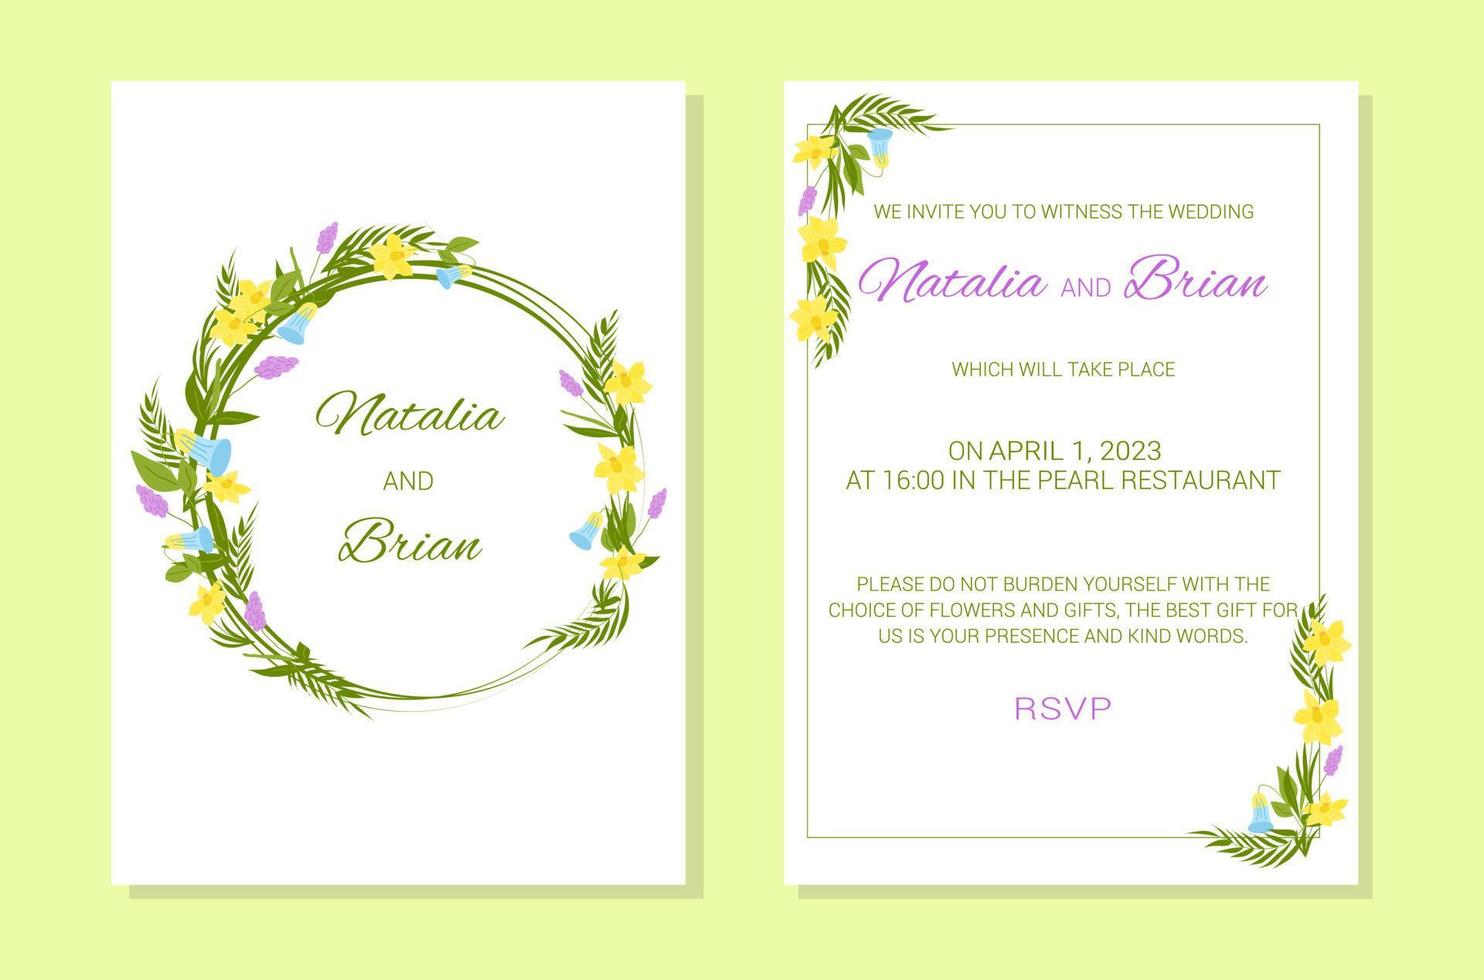 Wedding invitation template. Flower frame and text vector